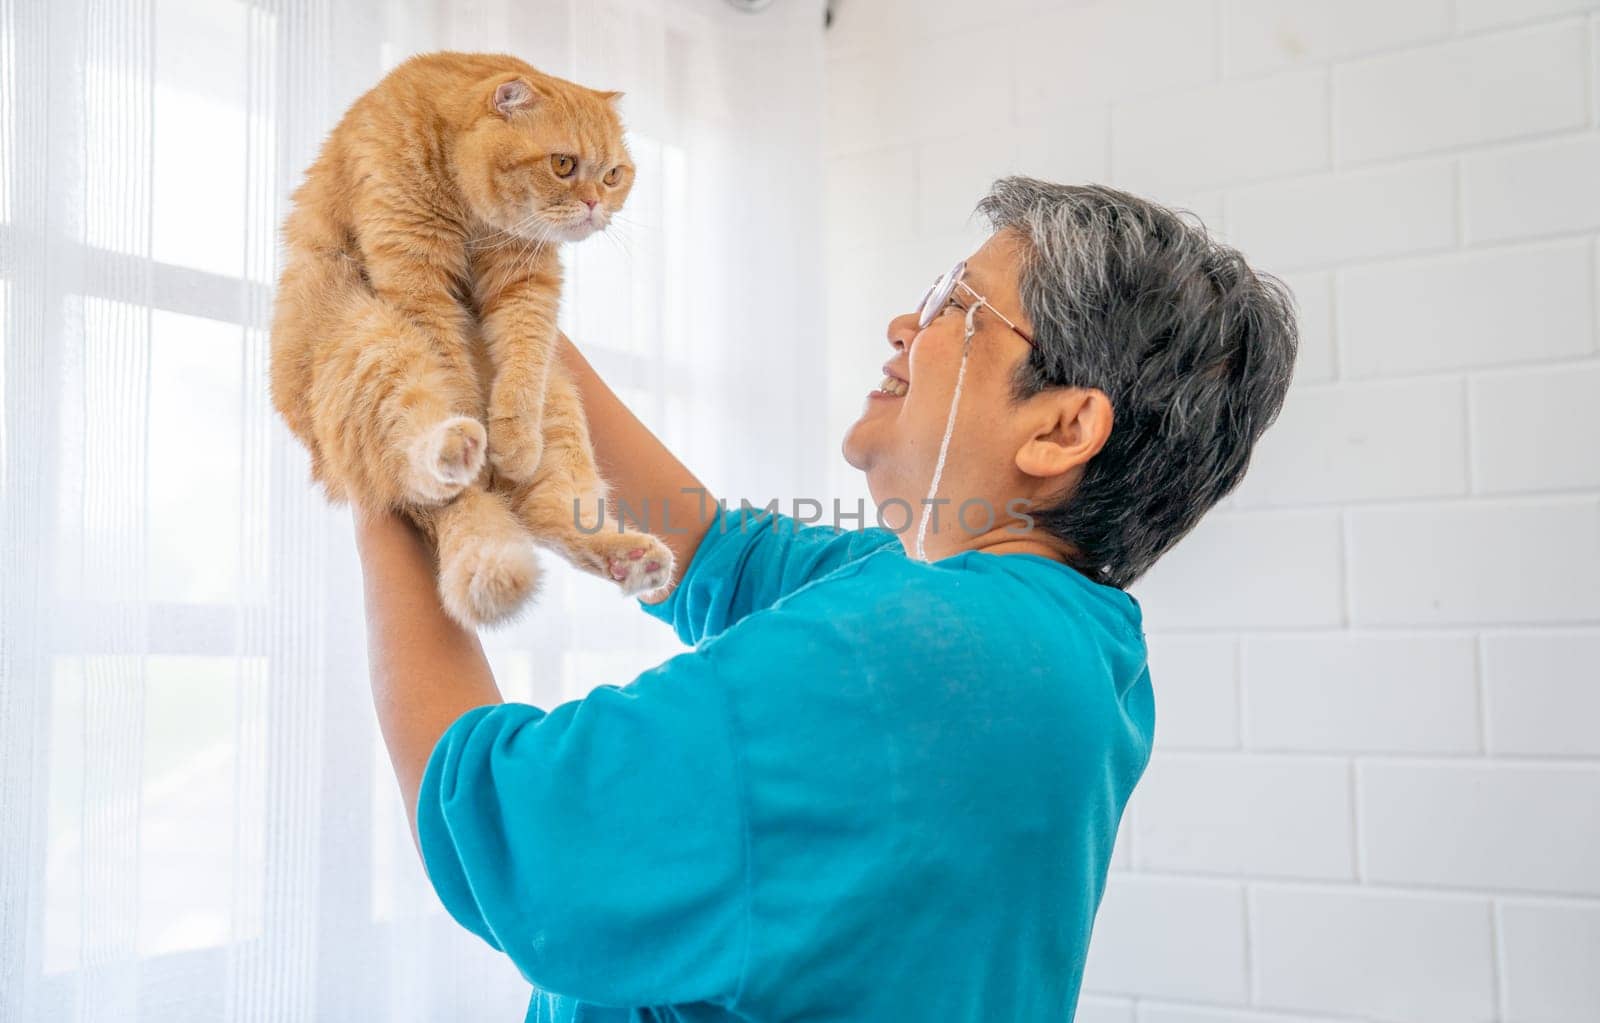 Asian senior woman hold cat and smiling stand in front of glass windows with white curtain and they look happiness together in their house.